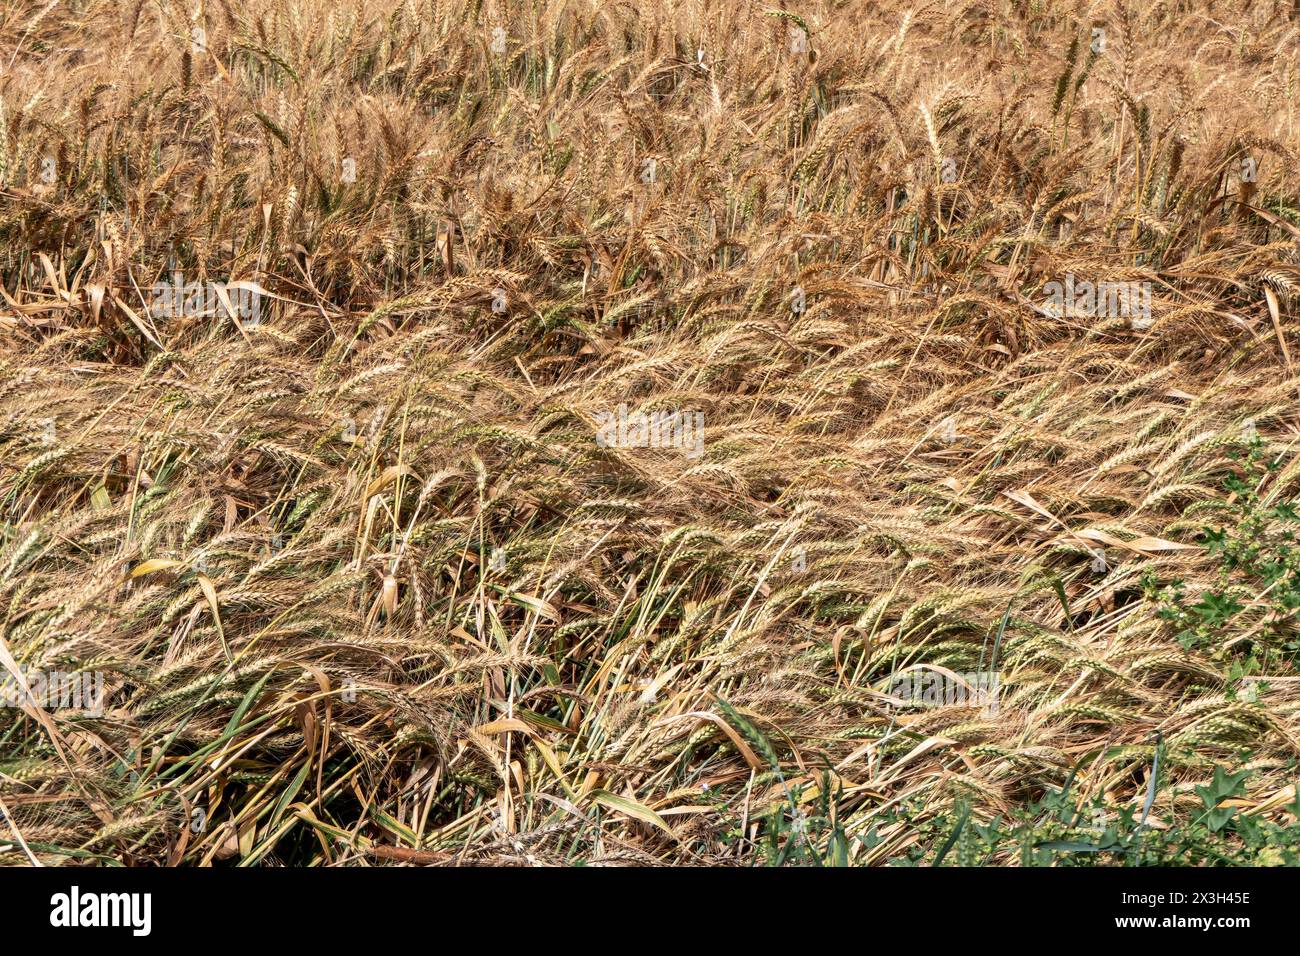 high-resolution image featuring a lush golden wheat field ready for harvest. Perfect for projects related to agriculture, farming, natural landscapes, Stock Photo